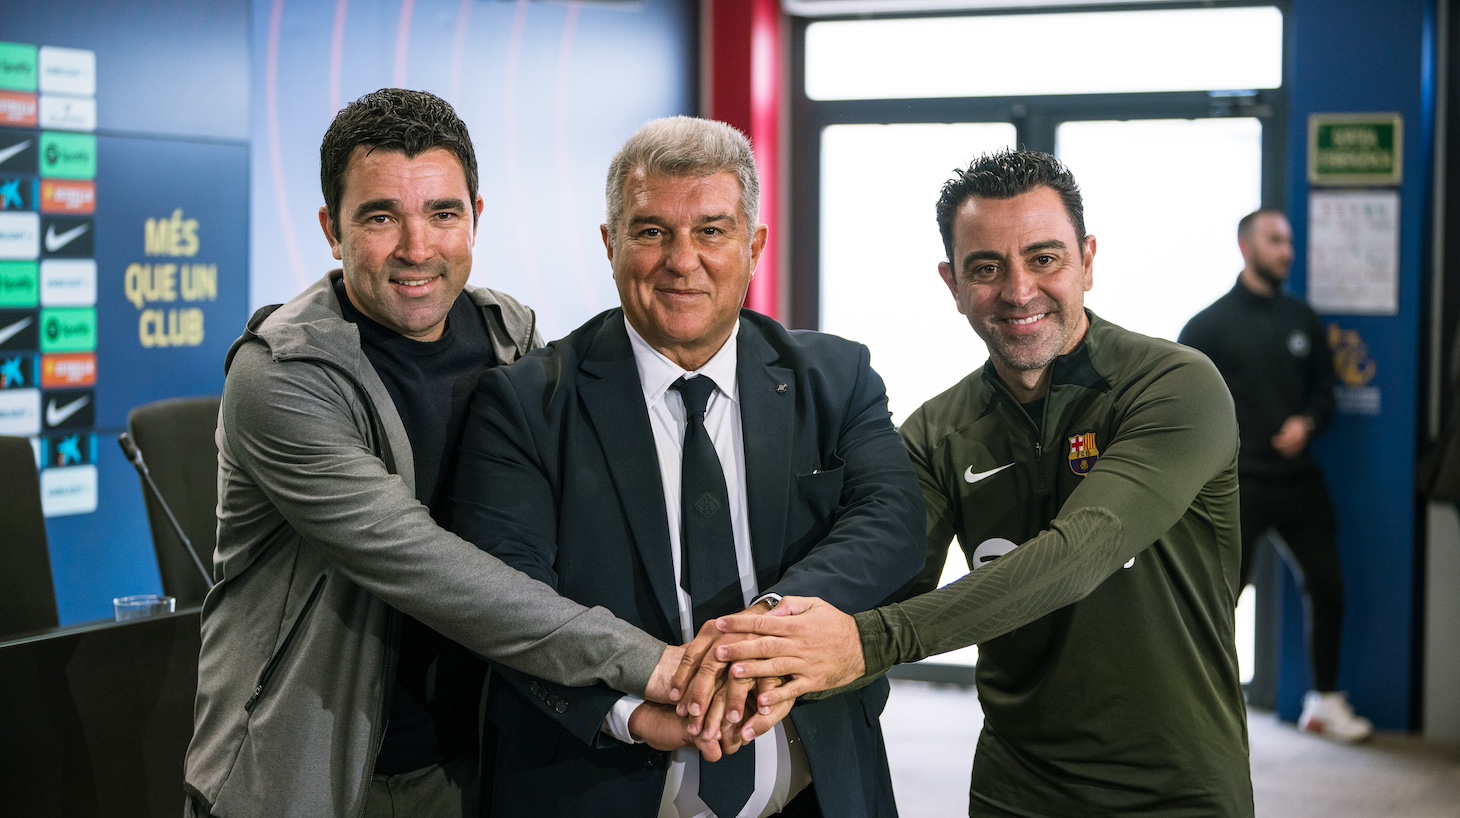 Xavi Hernandez, with Deco and Joan Laporta, during the press conference called by FC Barcelona to announce his continuity as coach of the club until June 2025, in Barcelona, Spain, on April 25, 2024.